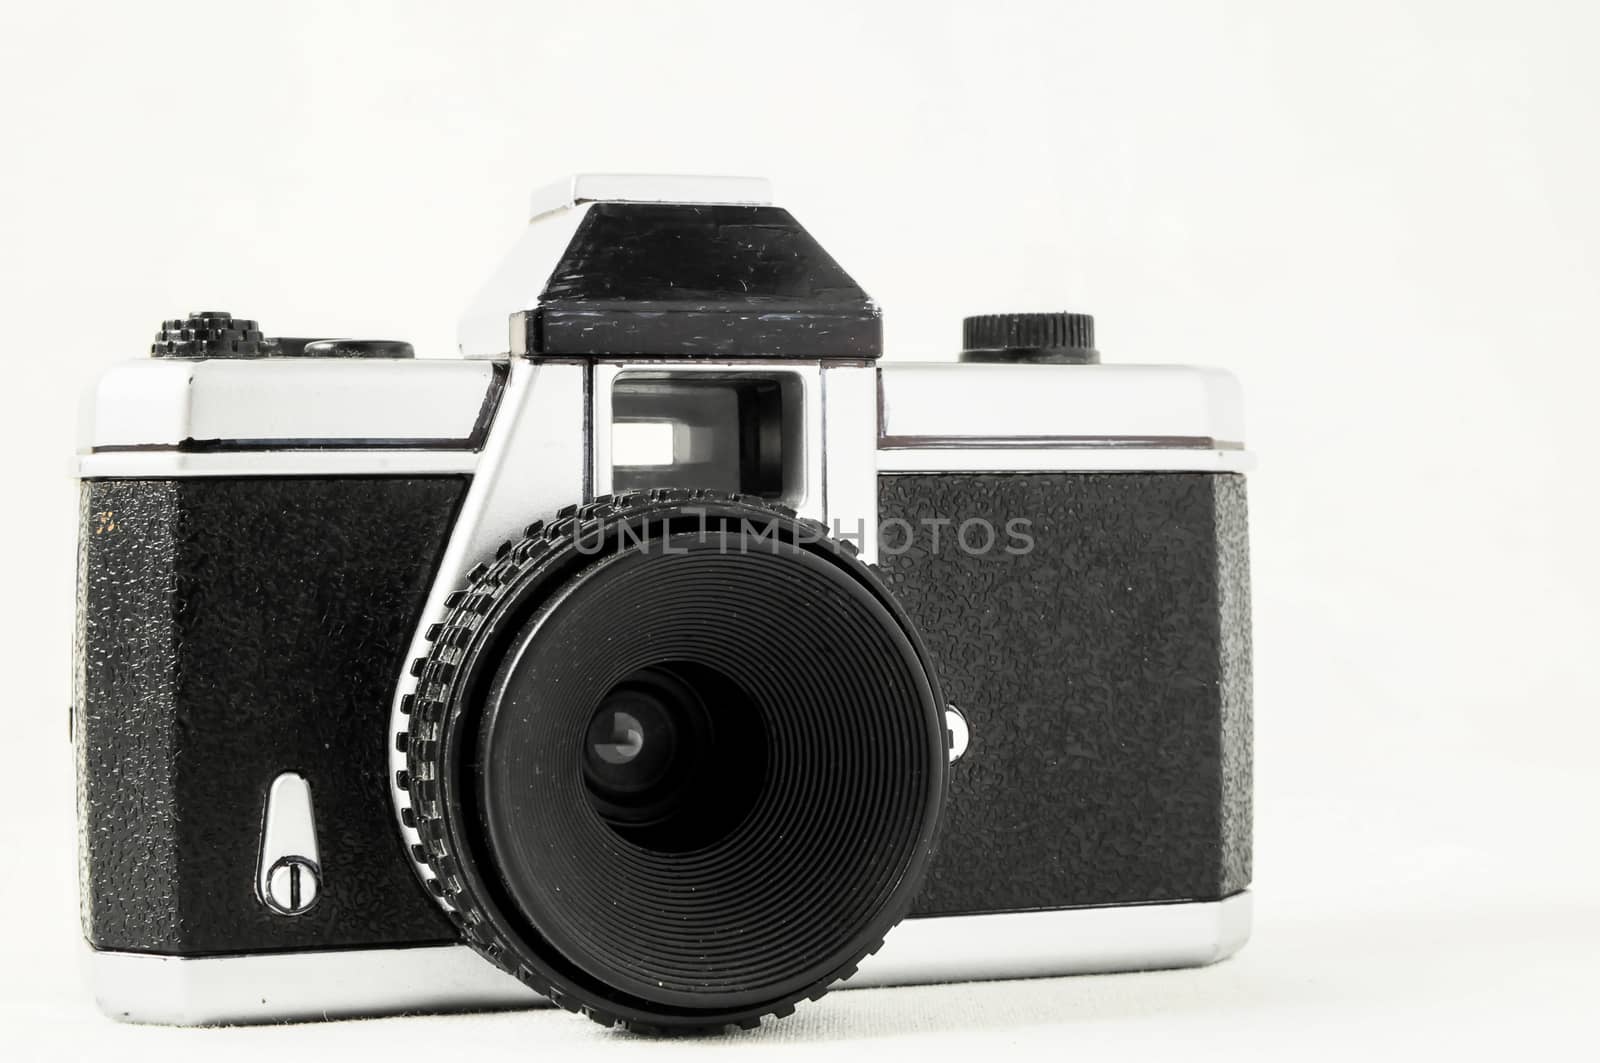 Classic 35mm Plastic Toy Photo Camera on a White Background